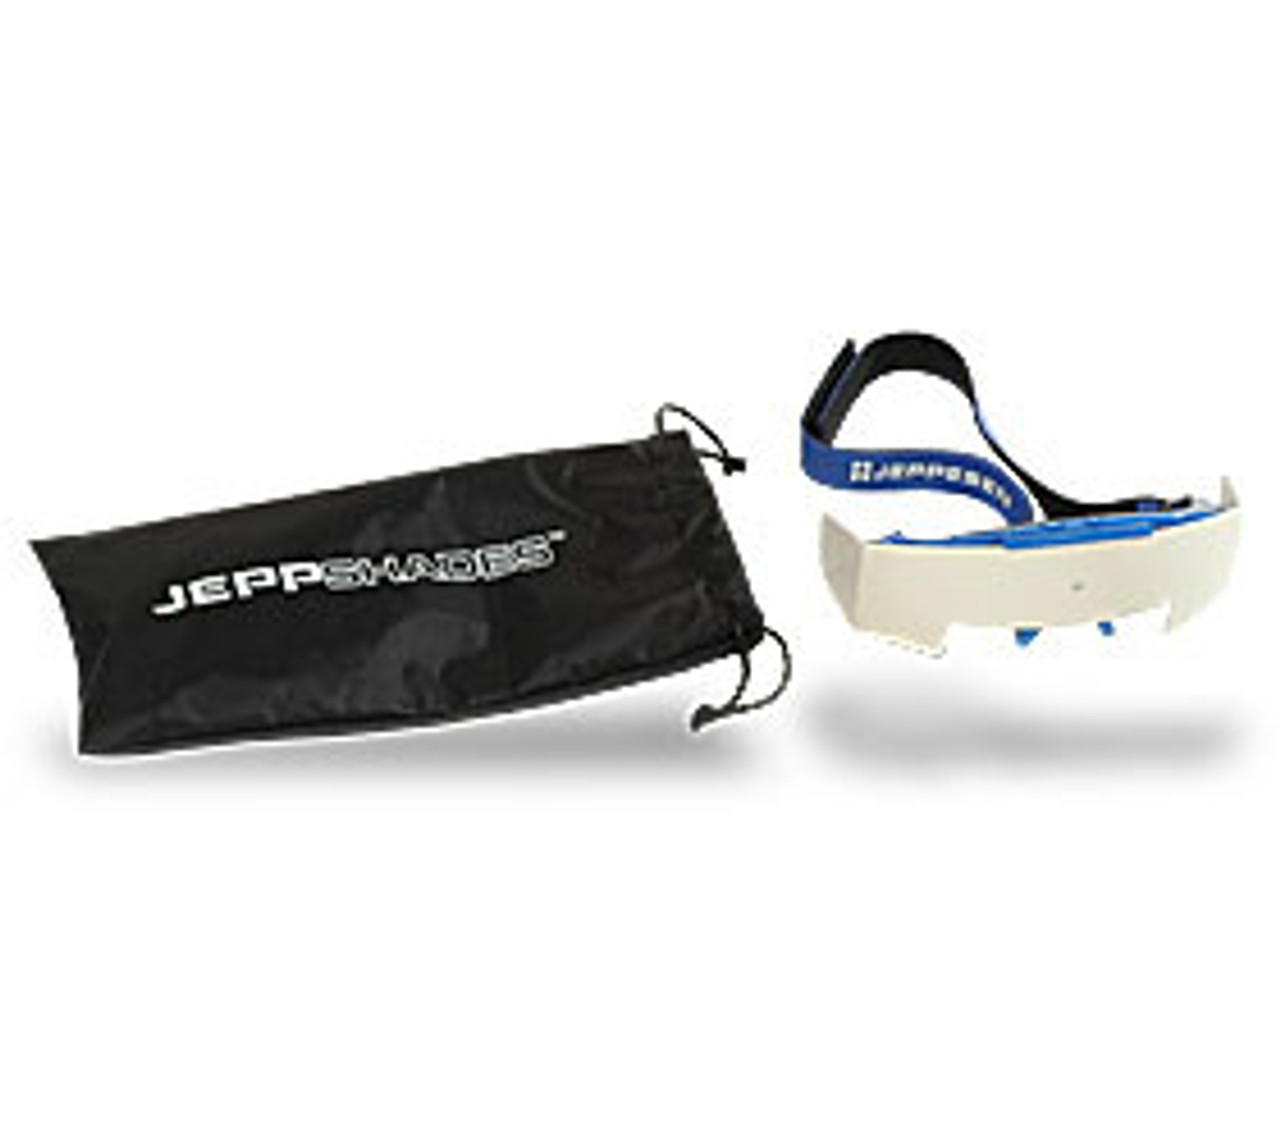 Jeppshades Ifr View Limiting Device